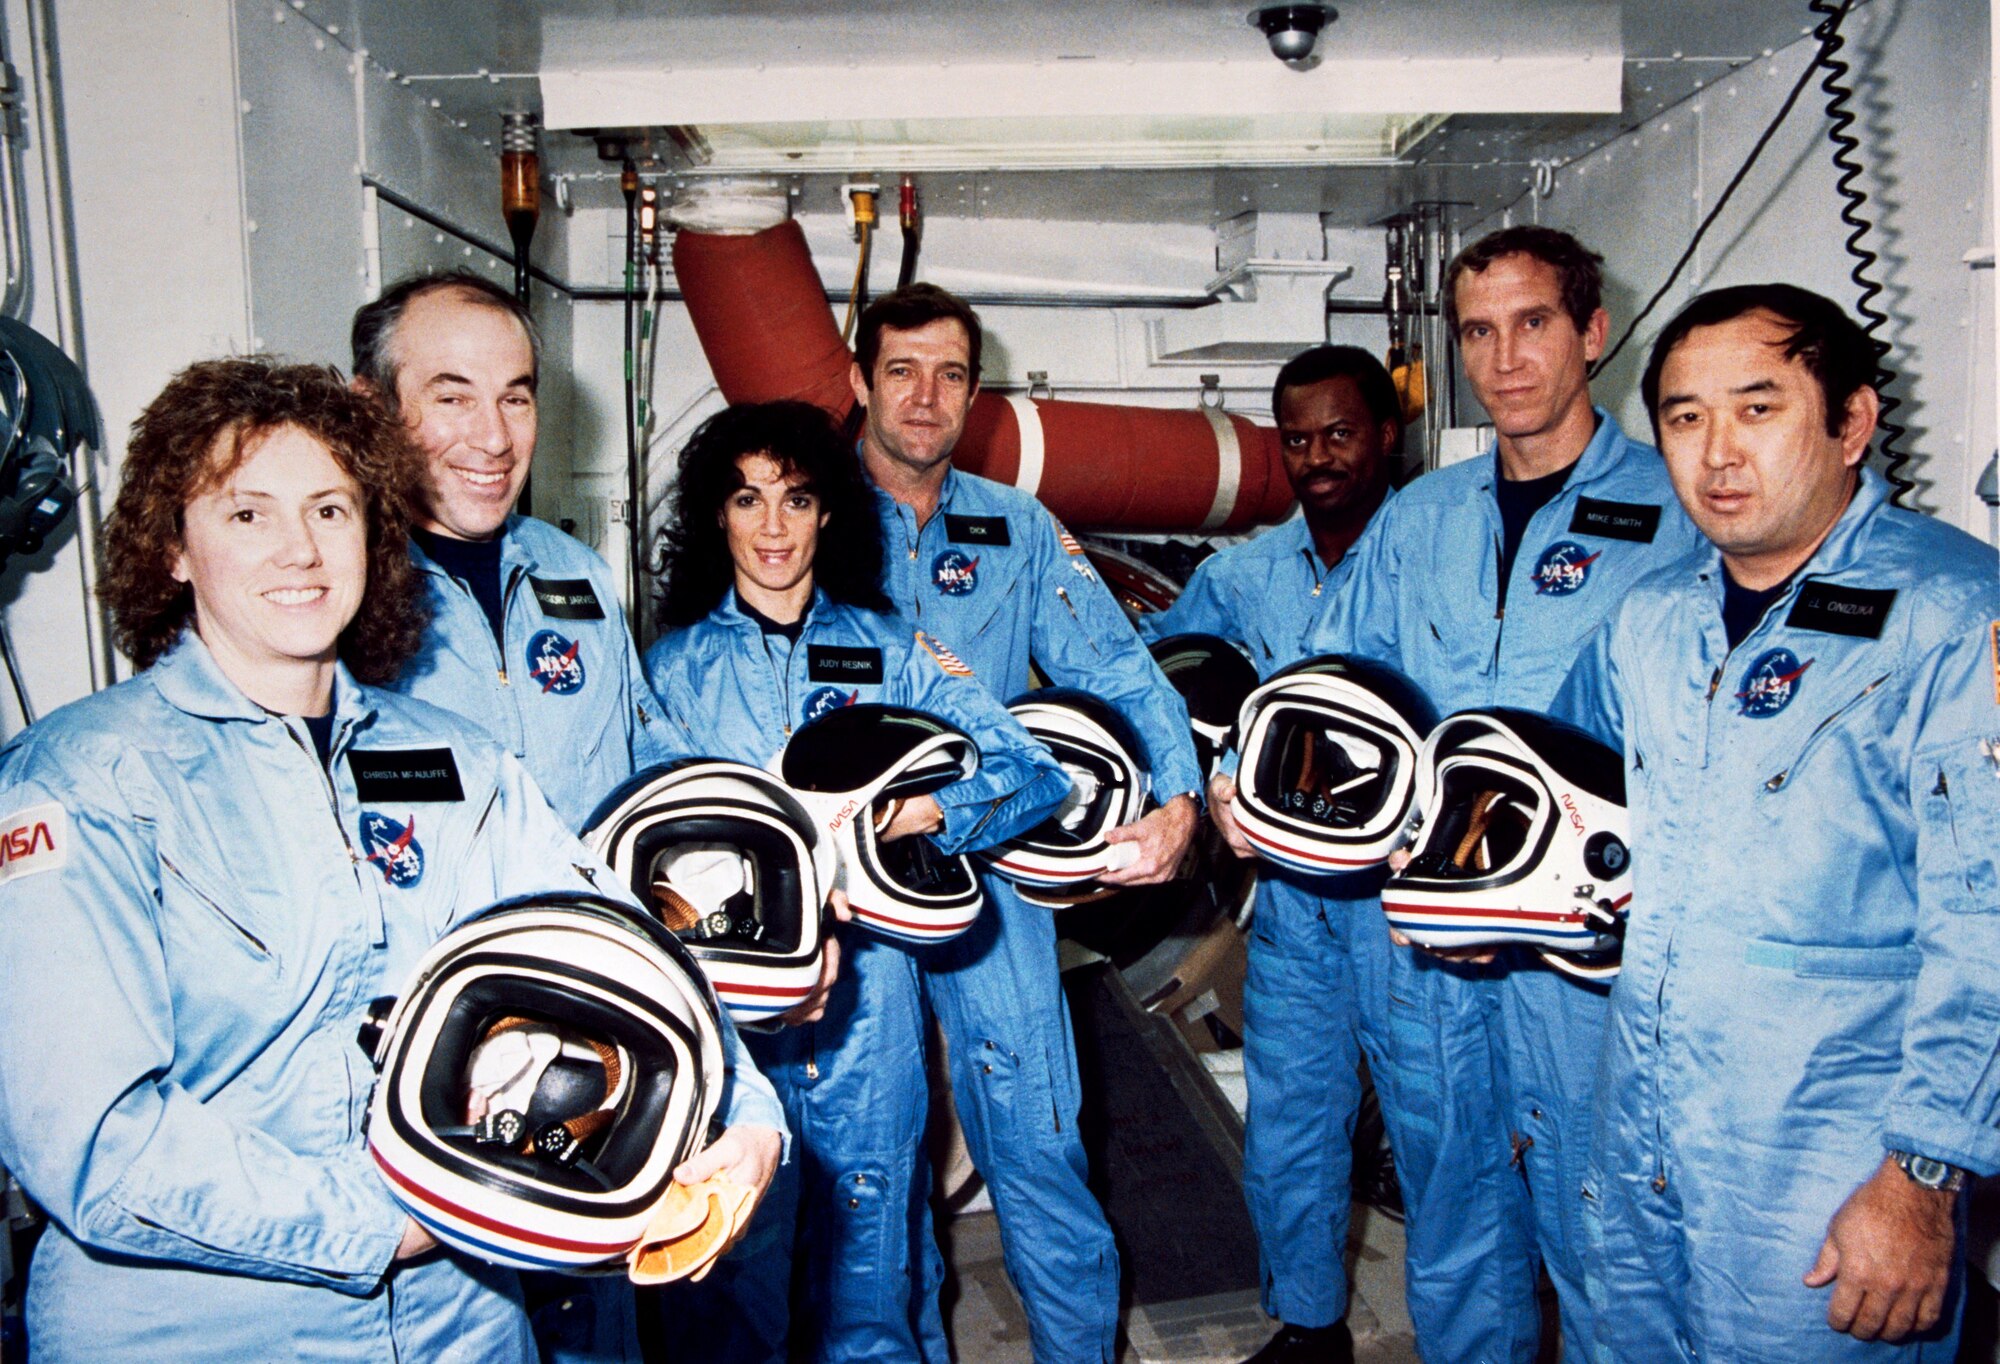 STS-51L crew members pose during a break in countdown training in the White Room at Launch Pad 39B in November of 1985. From the left are Christa McAuliffe, Gregory Jarvis, Judith Resnik, Francis "Dick" Scobee, Ronald McNair, Mike Smith and Ellison Onizuka. (Courtesy photo/NASA)